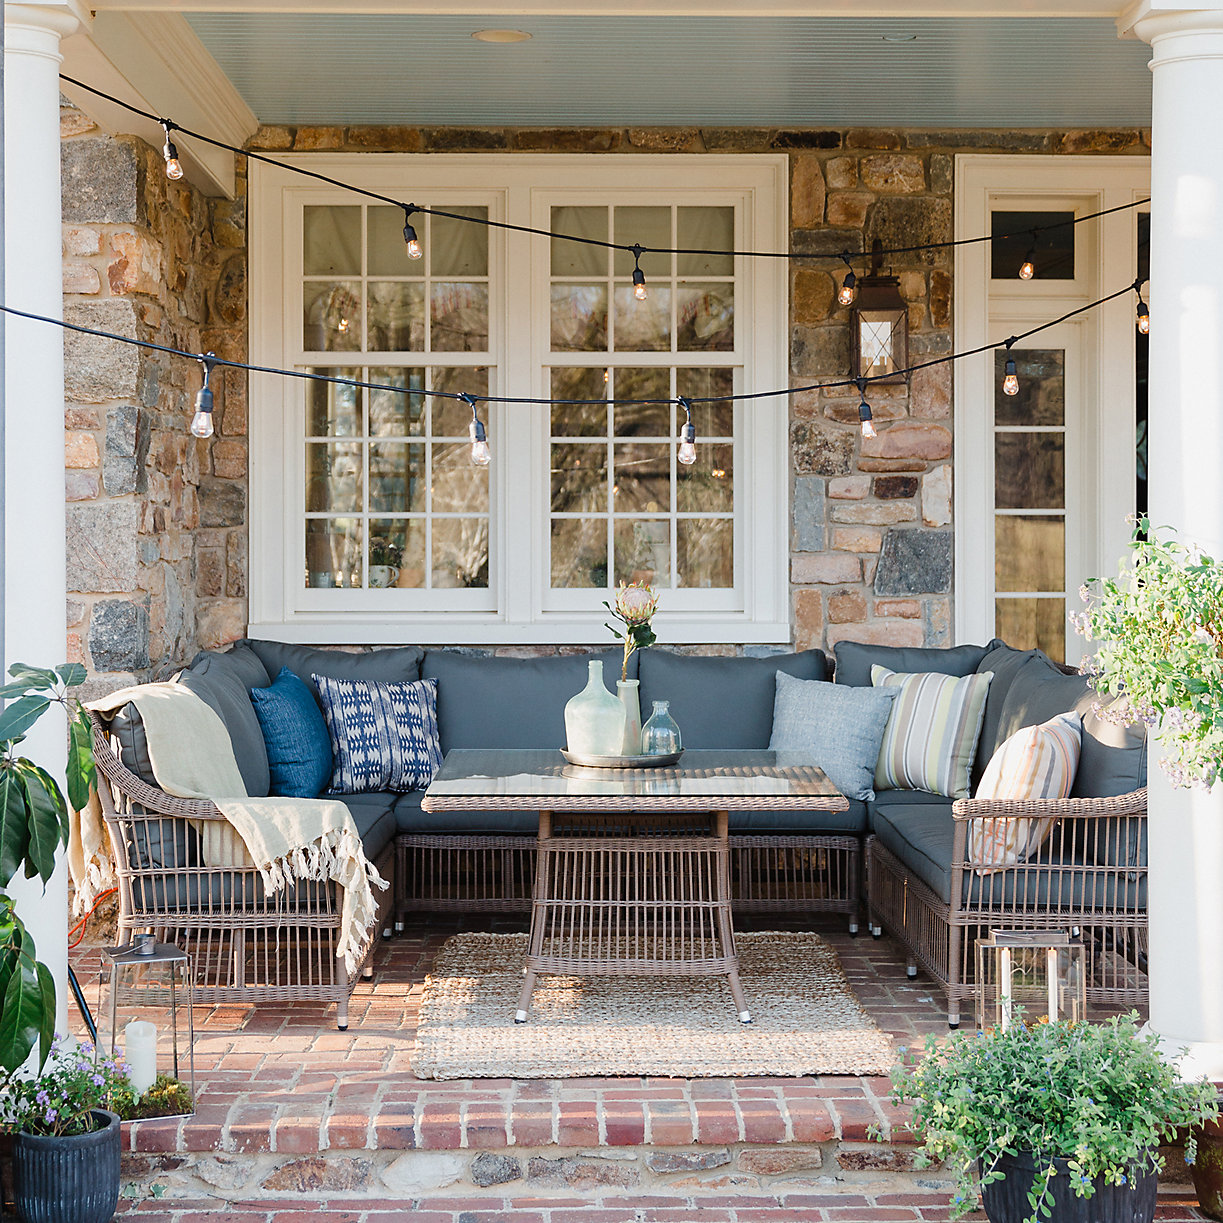 Stylish all-weather outdoor dining nook.